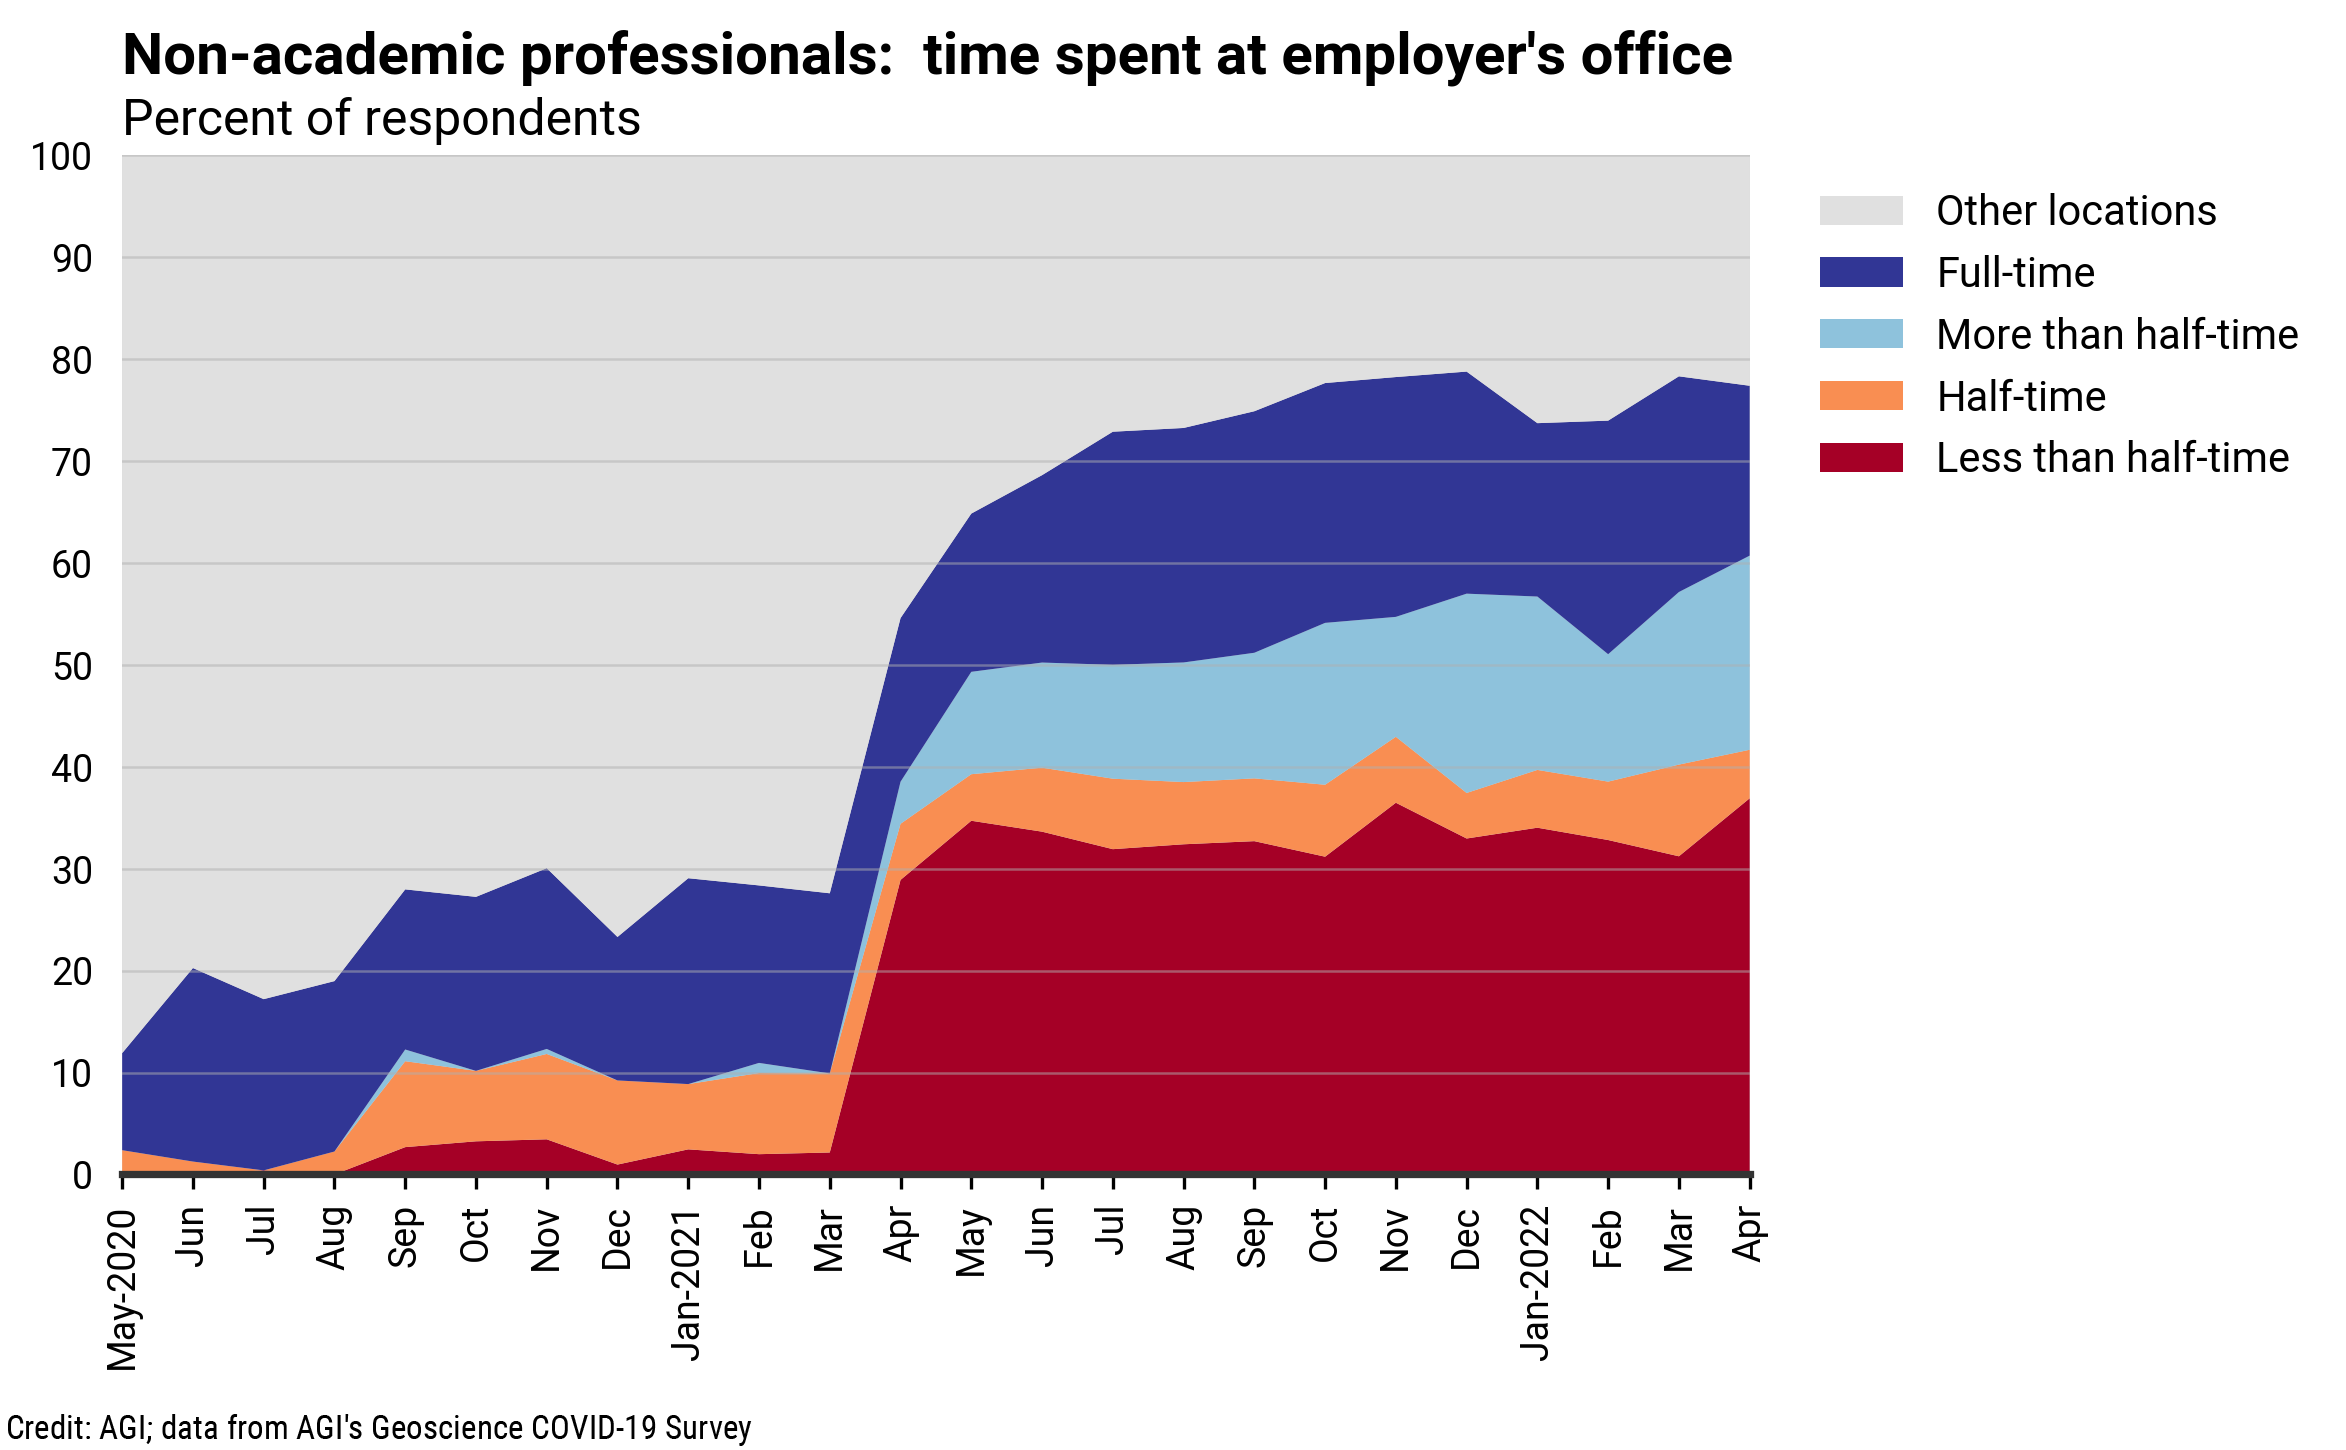 DB_2022-006 chart 06: Non-academic professionals: time spent at employer's office (Credit: AGI; data from AGI's Geoscience COVID-19 Survey)